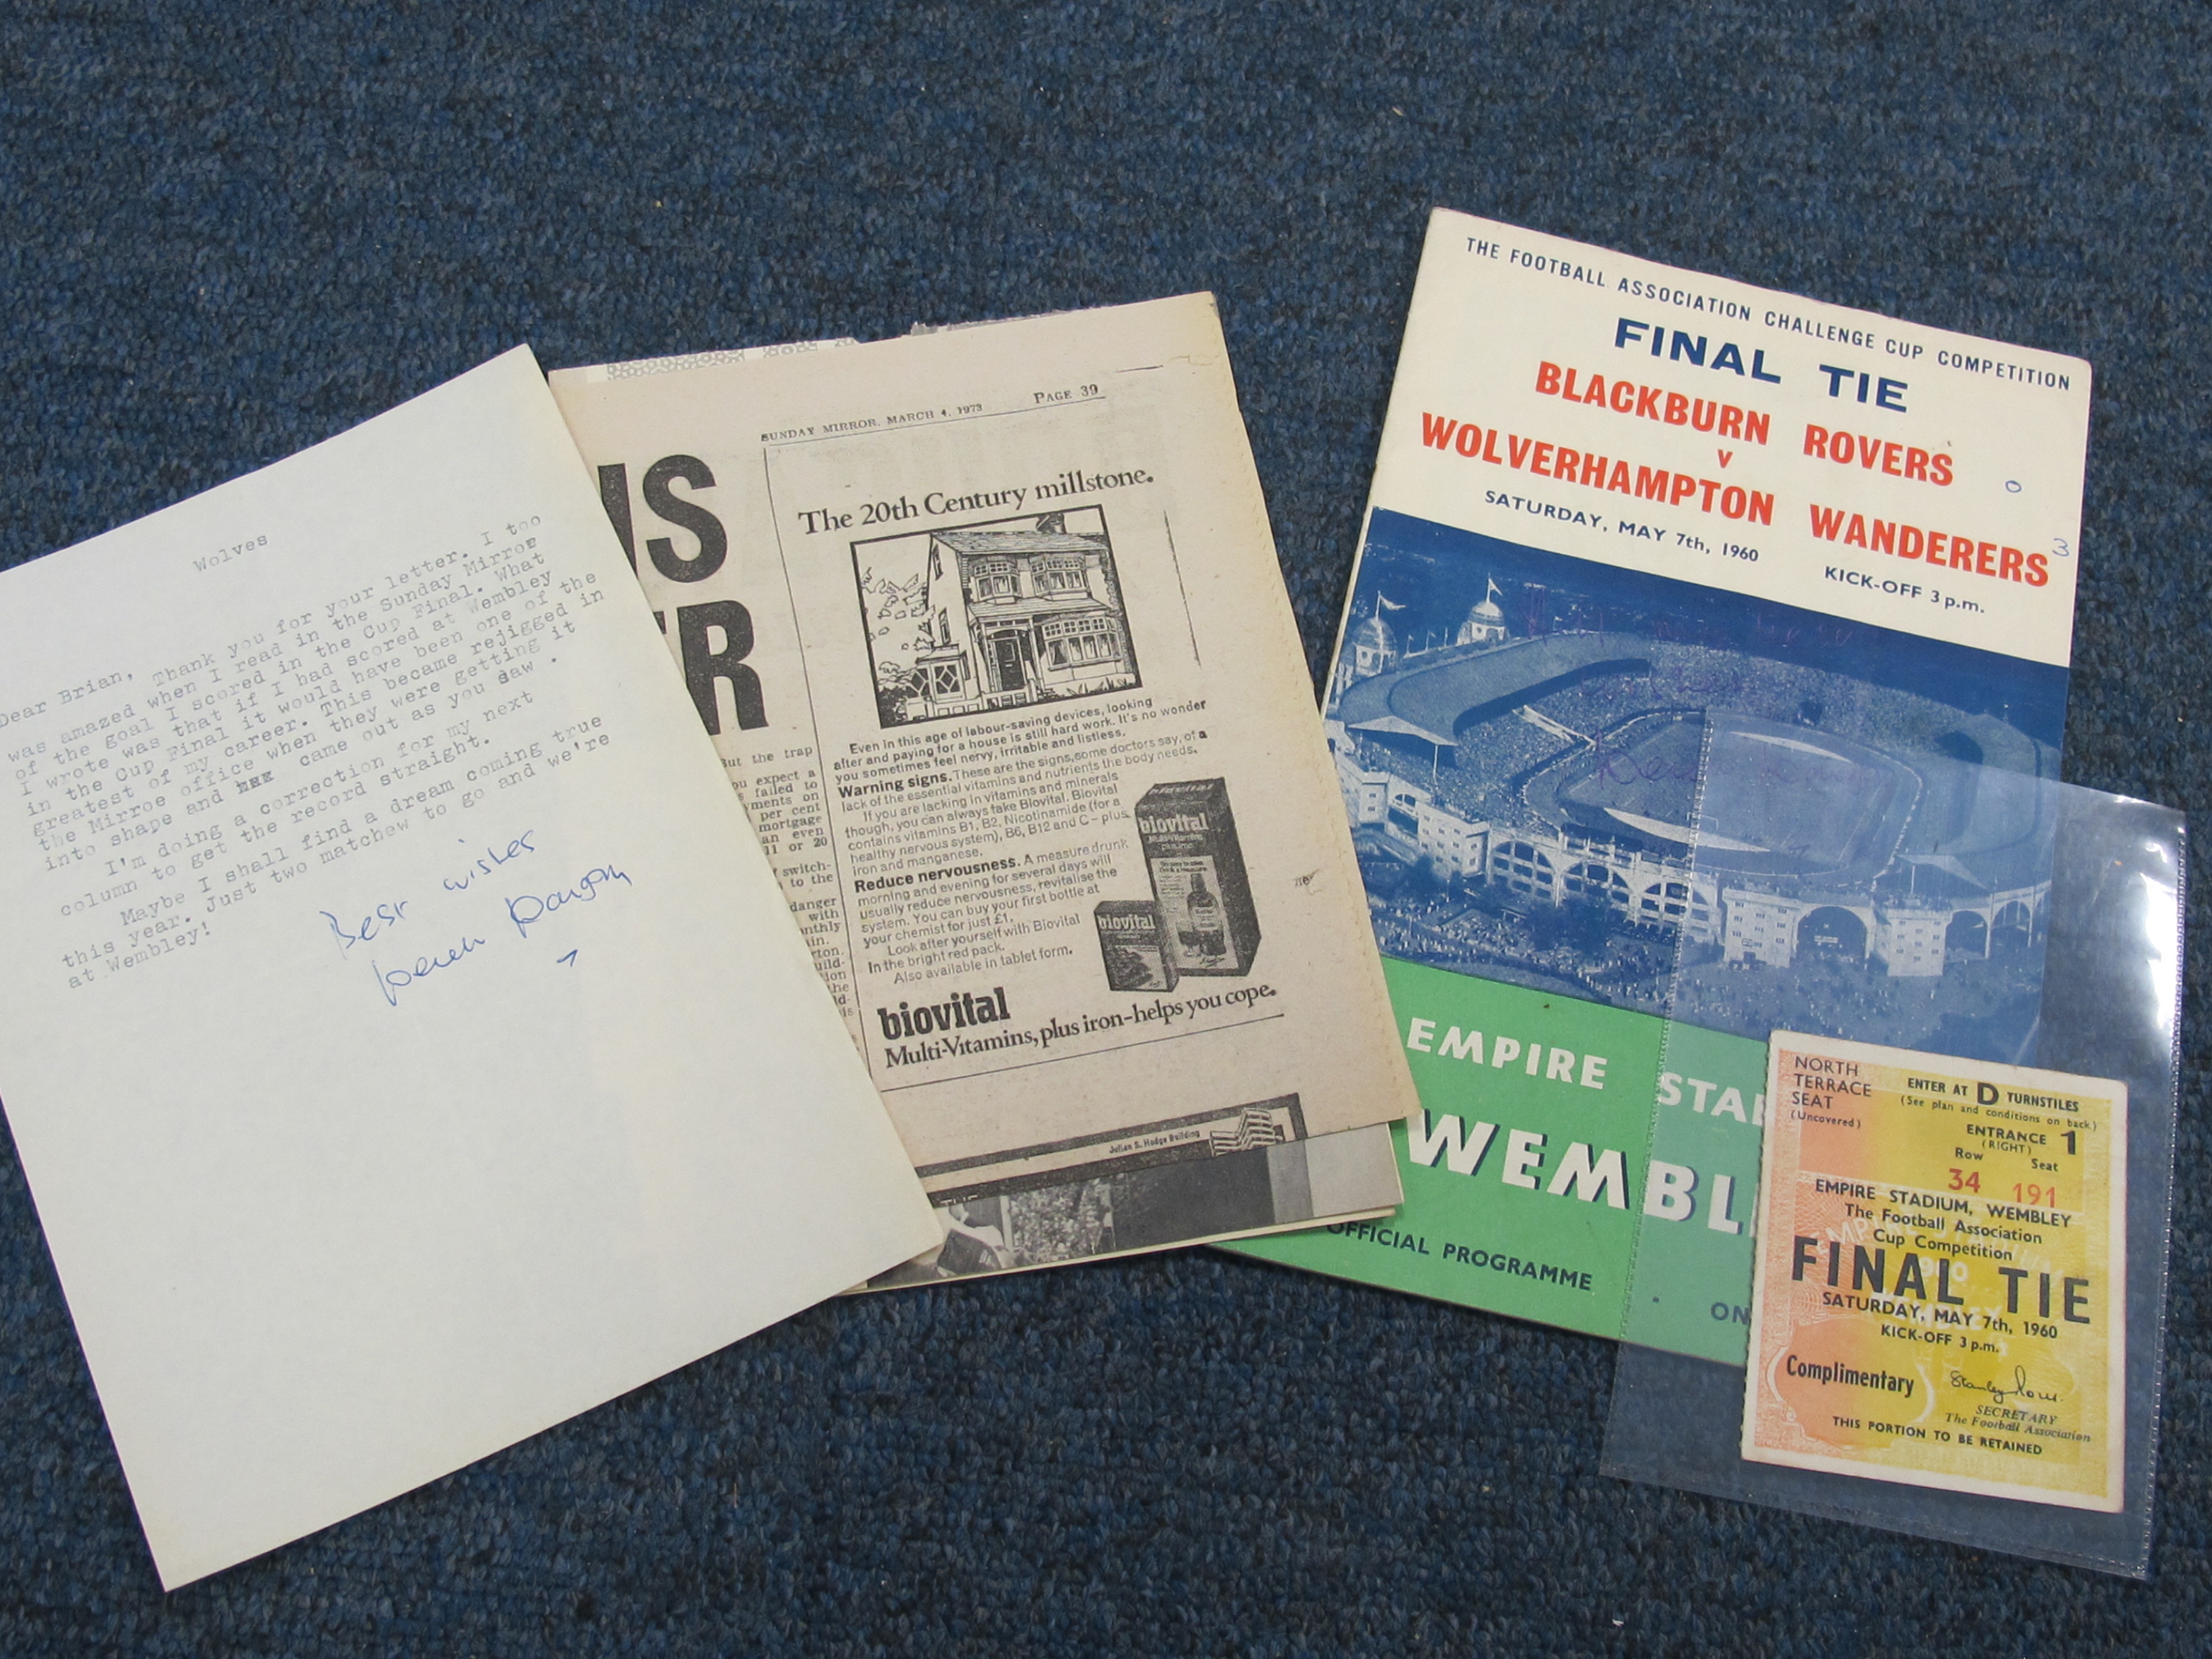 FA Cup Final Programme & Ticket for 7th May 1960 Blackburn v Wolverhampton, autographed to cover